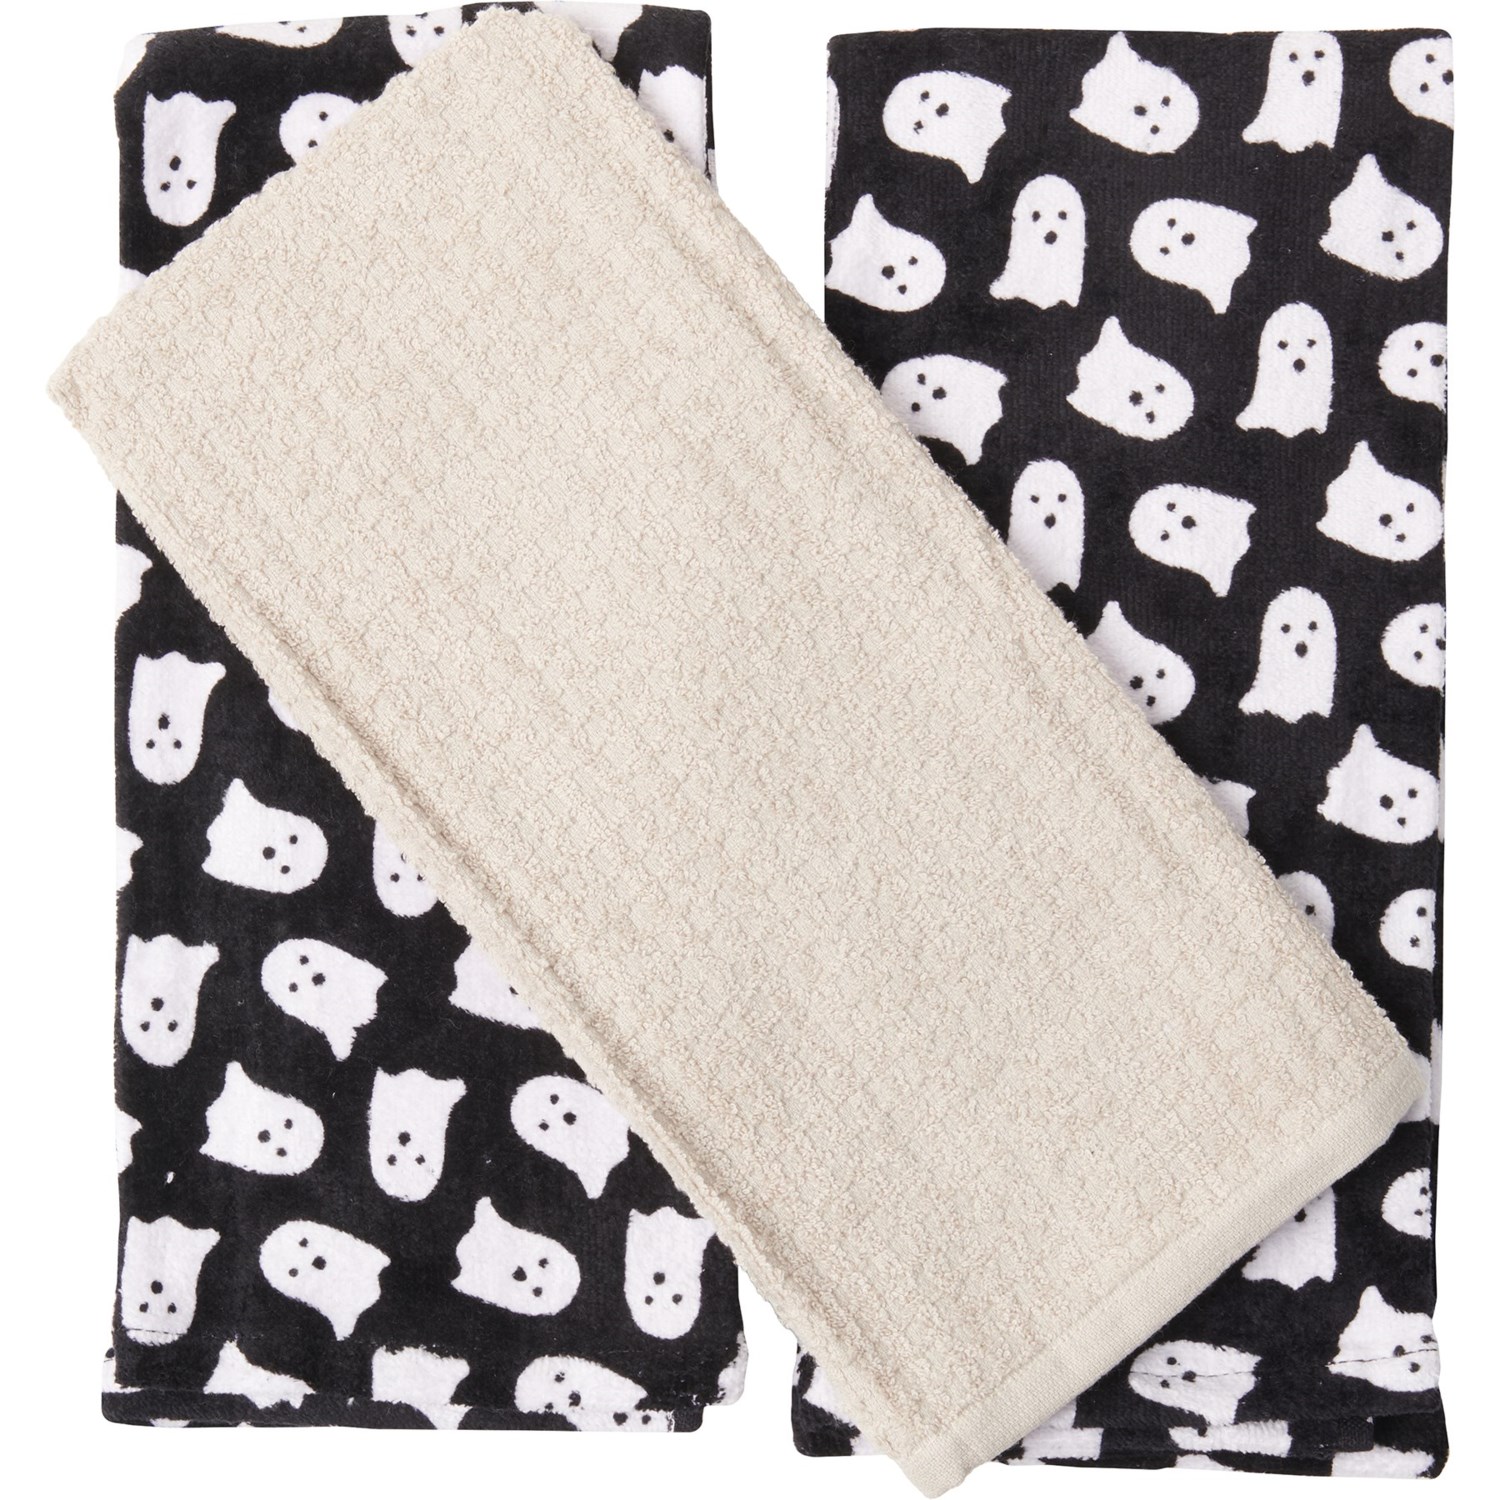 Cynthia Rowley CuRious New York Allover Ghost Halloween Kitchen Towels -  3-Pack - Save 61%